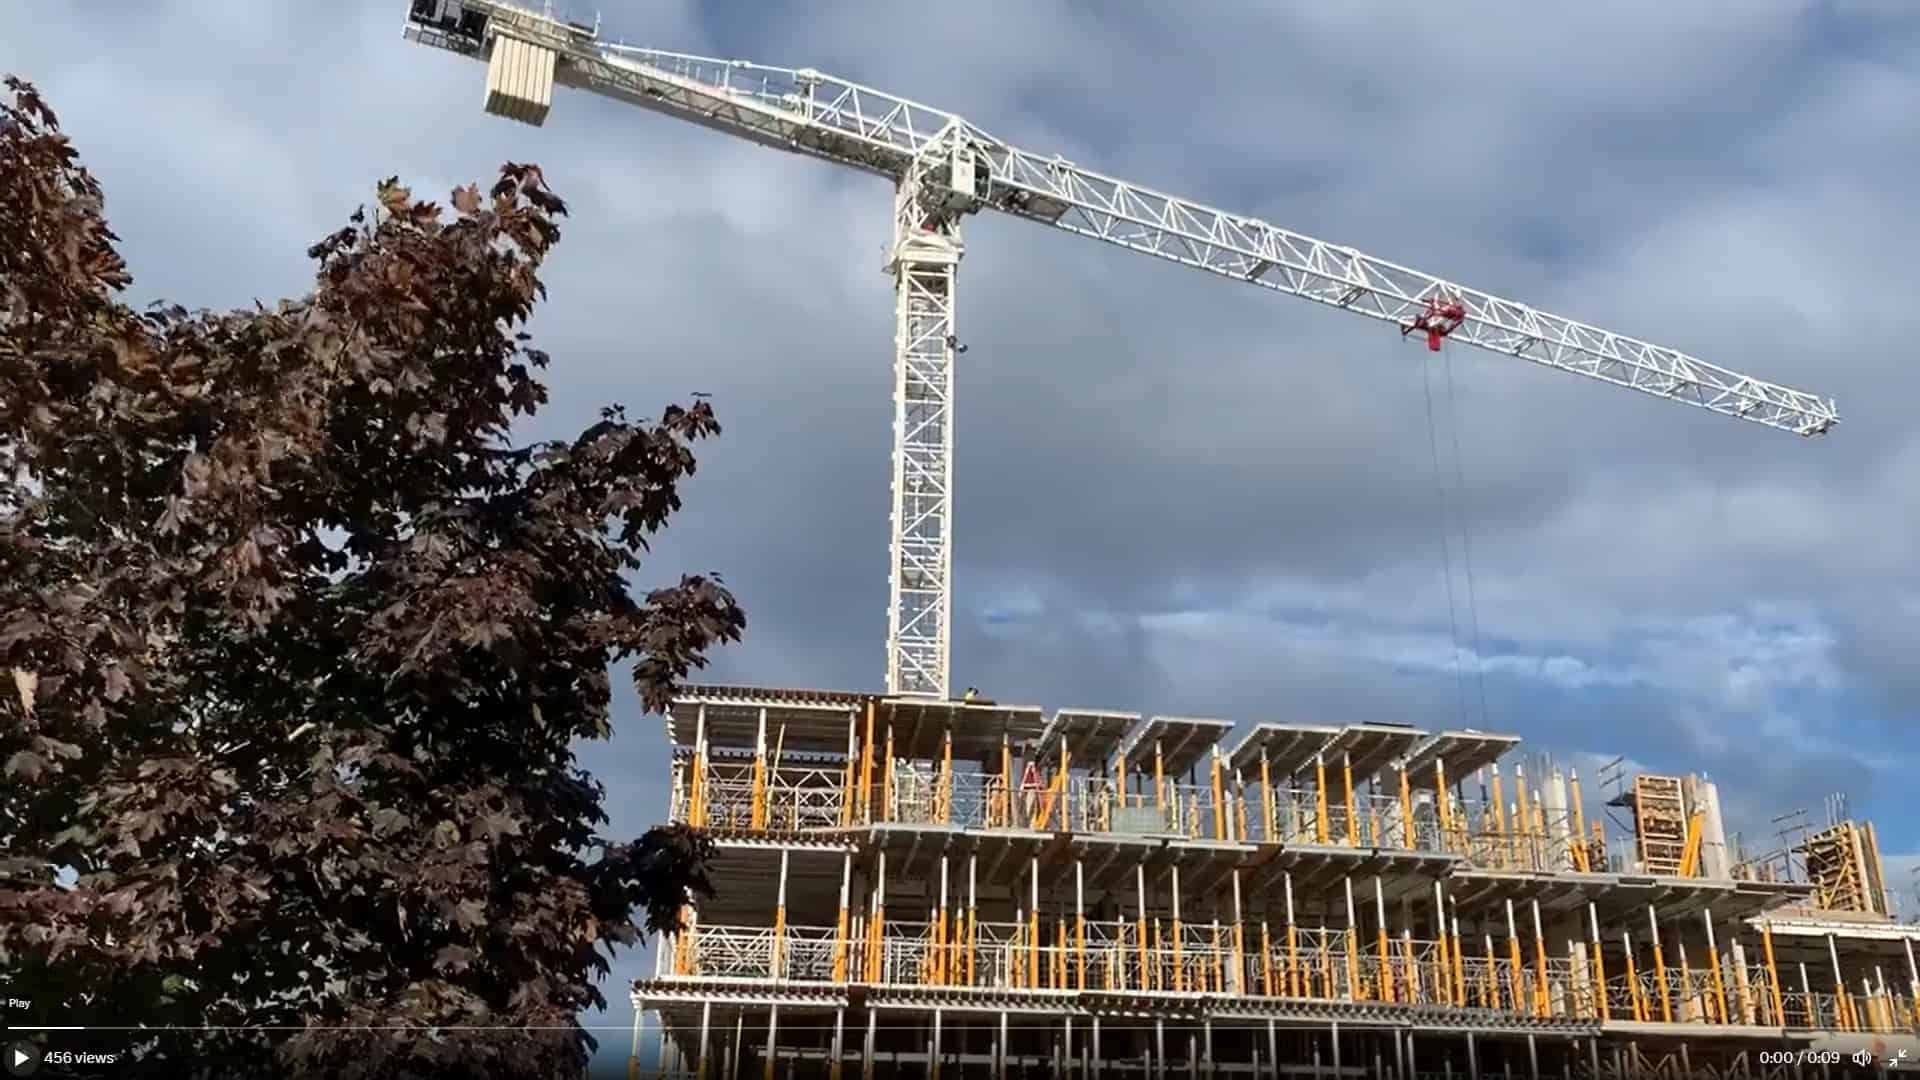 Burlington again has one of the lowest rates of home building in Ontario